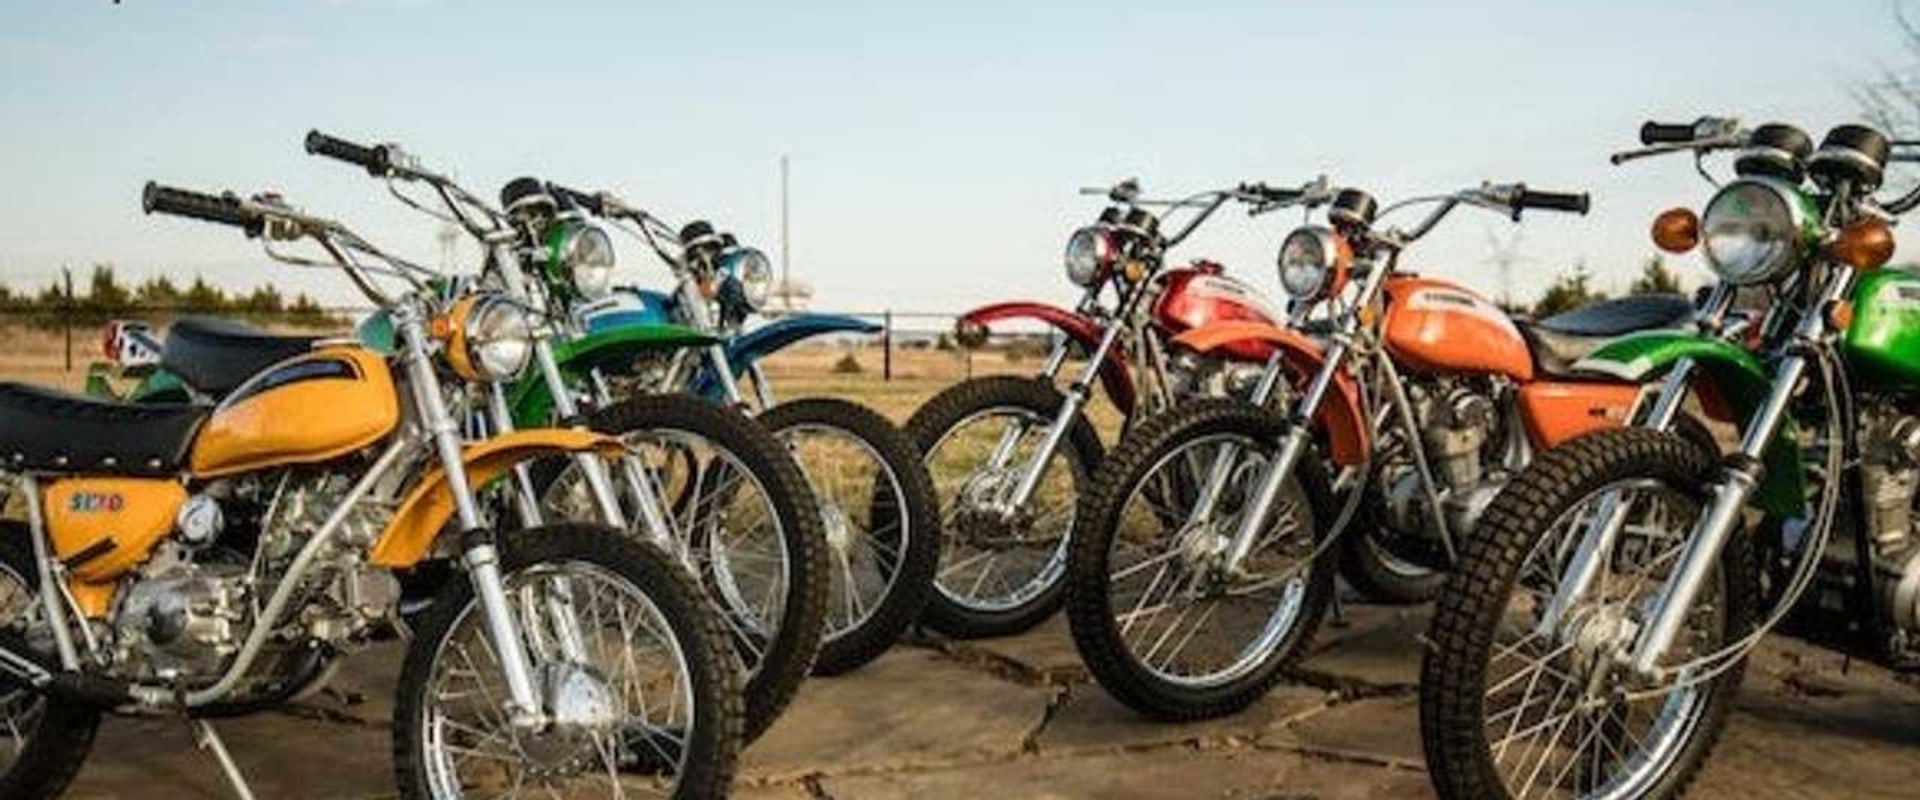 Used Motorcycle Sales: A Comprehensive Overview